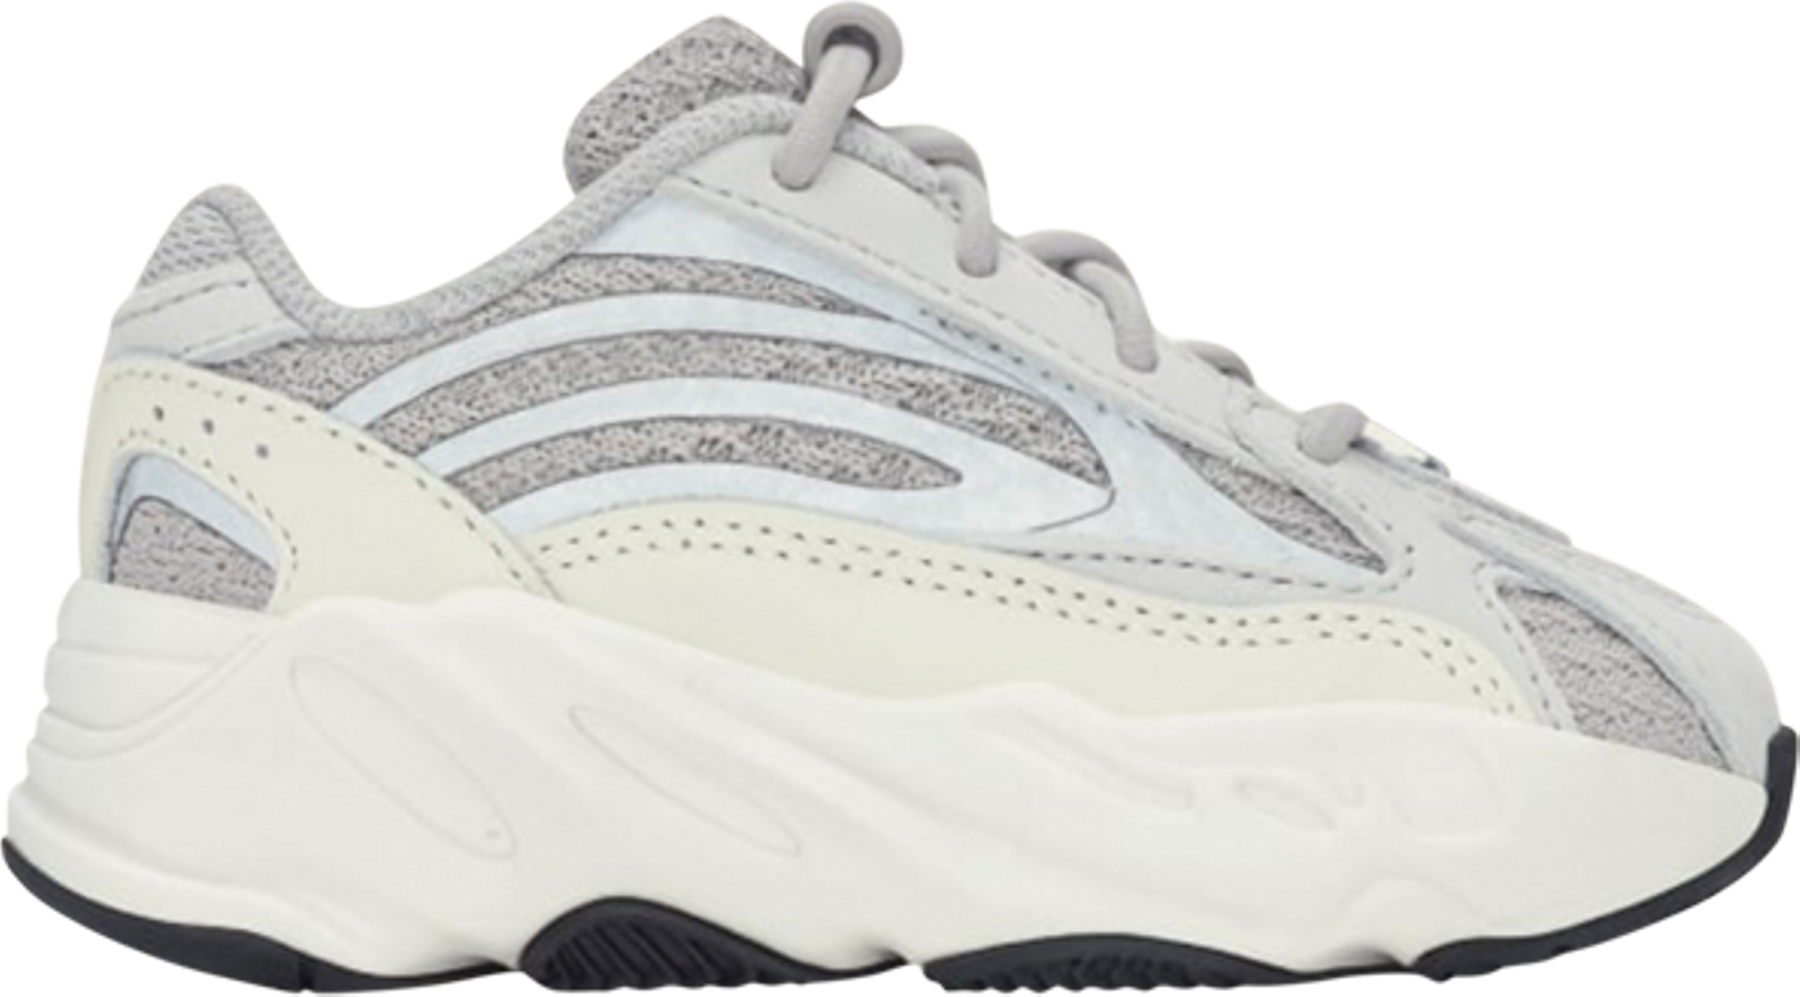 adidas Yeezy Boost 700 V2 Static (Kids and infants)